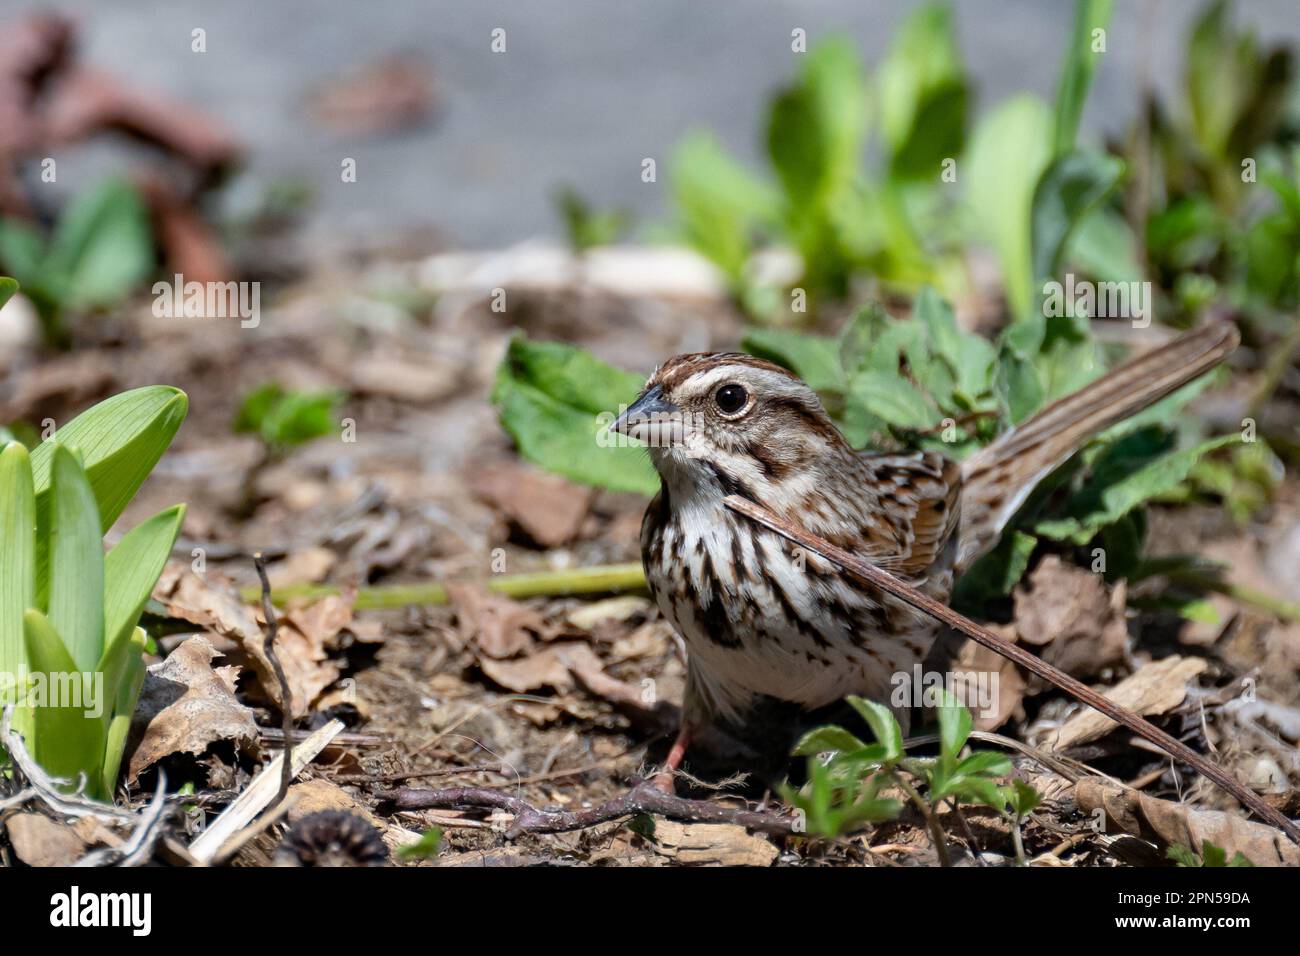 A Song sparrow, Melospiza melodia, foraging for seeds in a garden in Speculator, NY USA in the Adirondack Mountains. Stock Photo